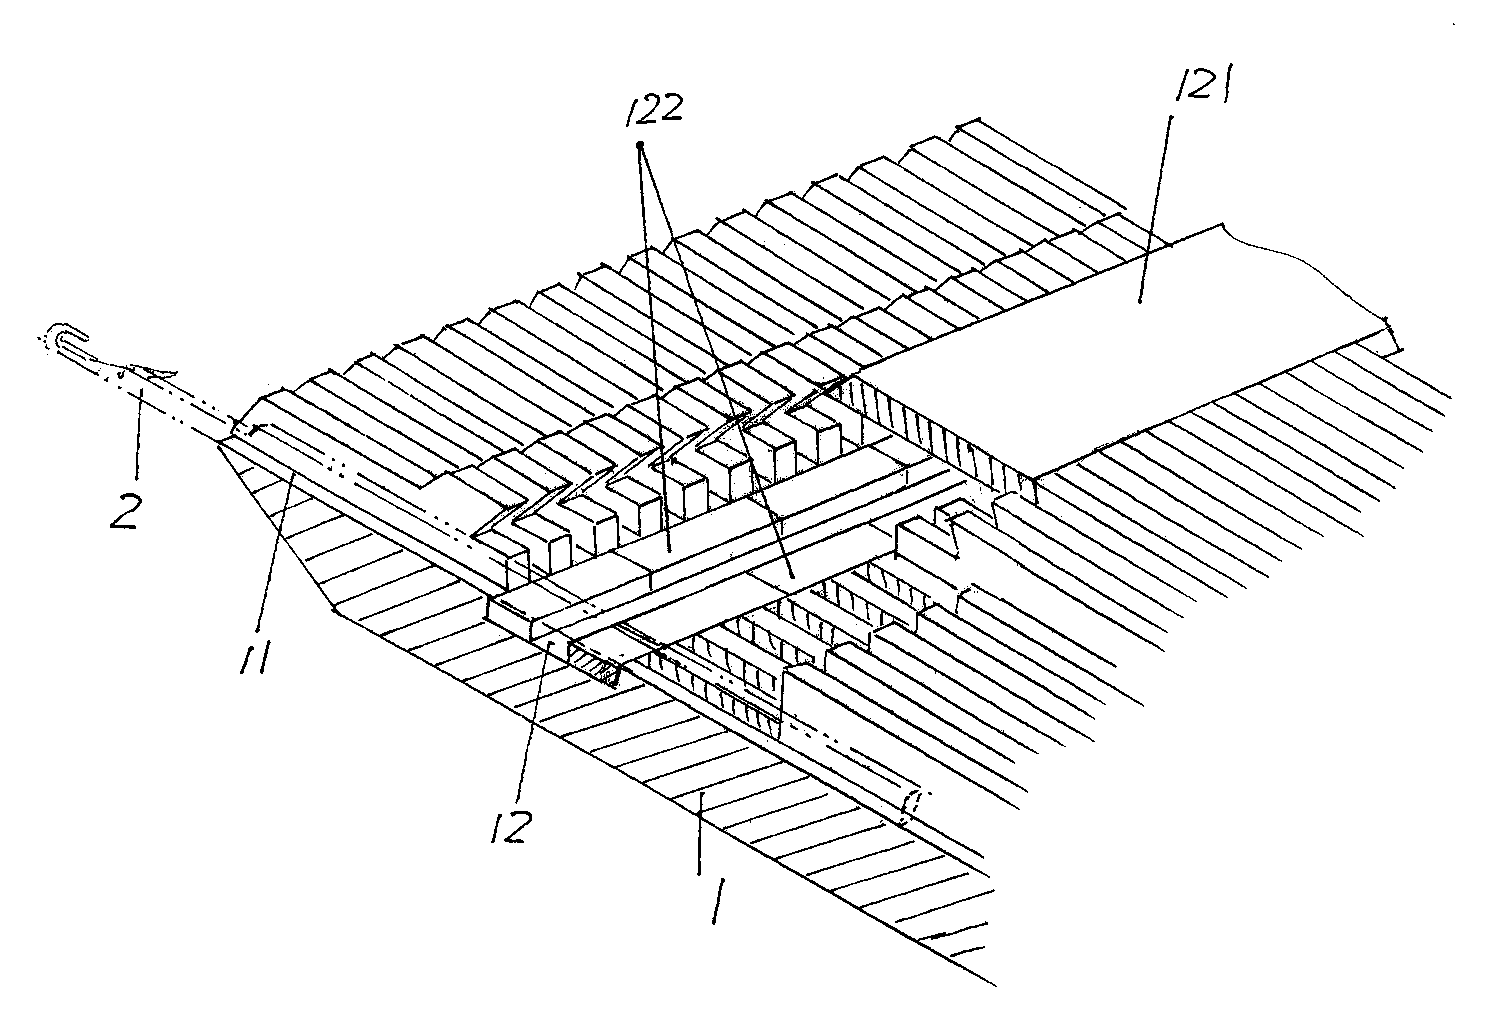 Needle bed structure of computerized flat knitting machine